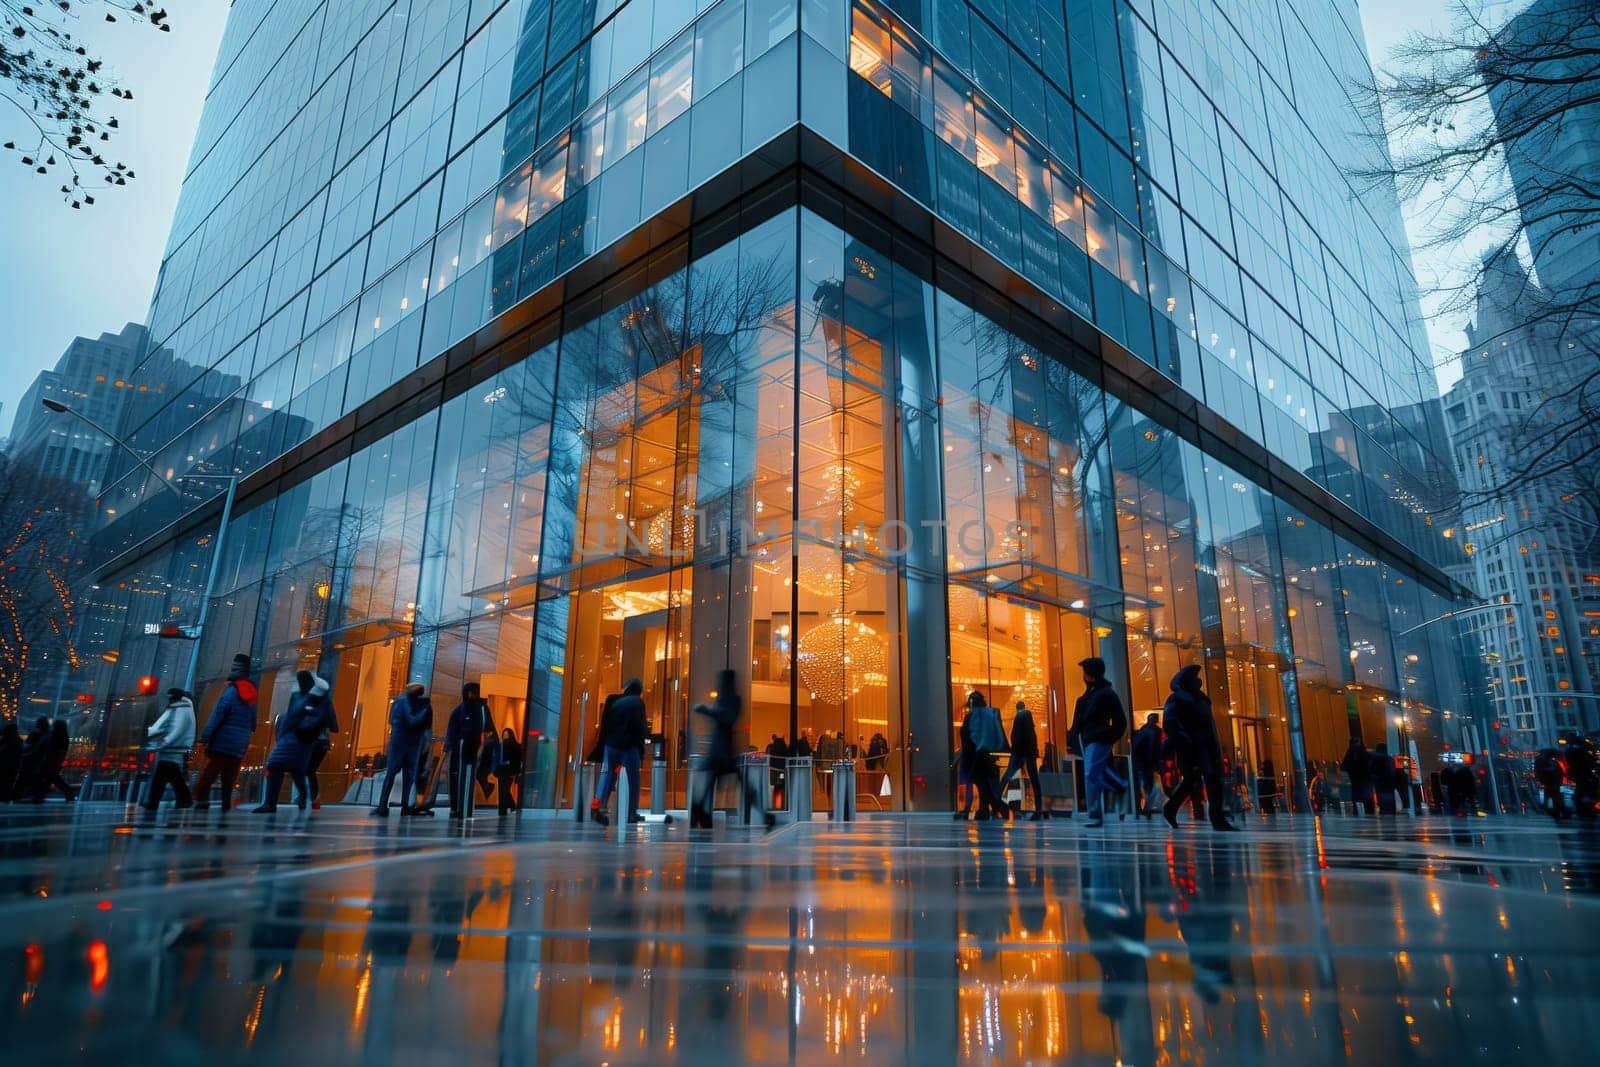 A group of individuals is strolling in front of a towering commercial building in the city, admiring its sleek glass facade and symmetry